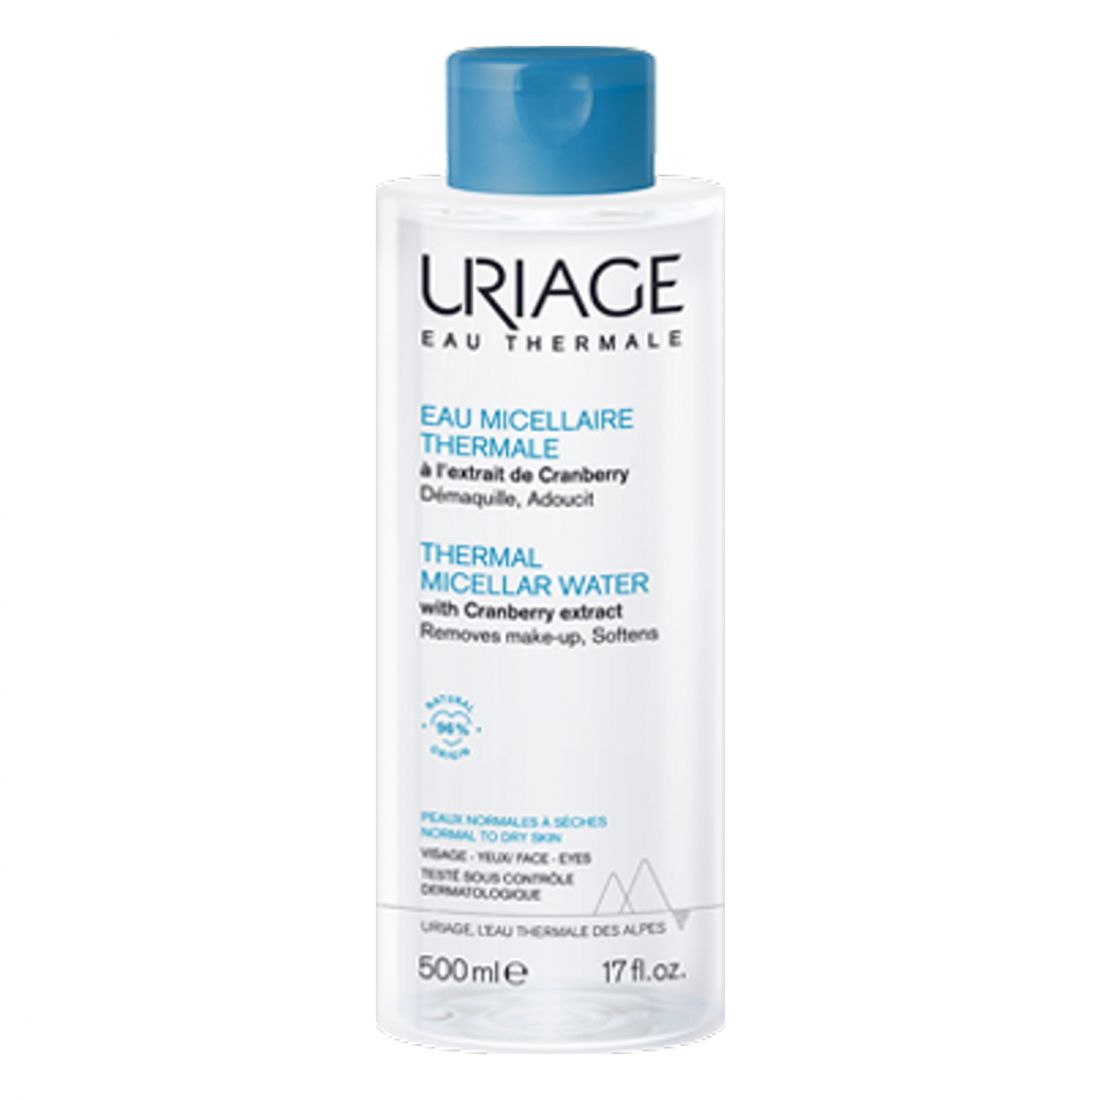 Uriage - Eau micellaire 'Thermale' - 500 ml